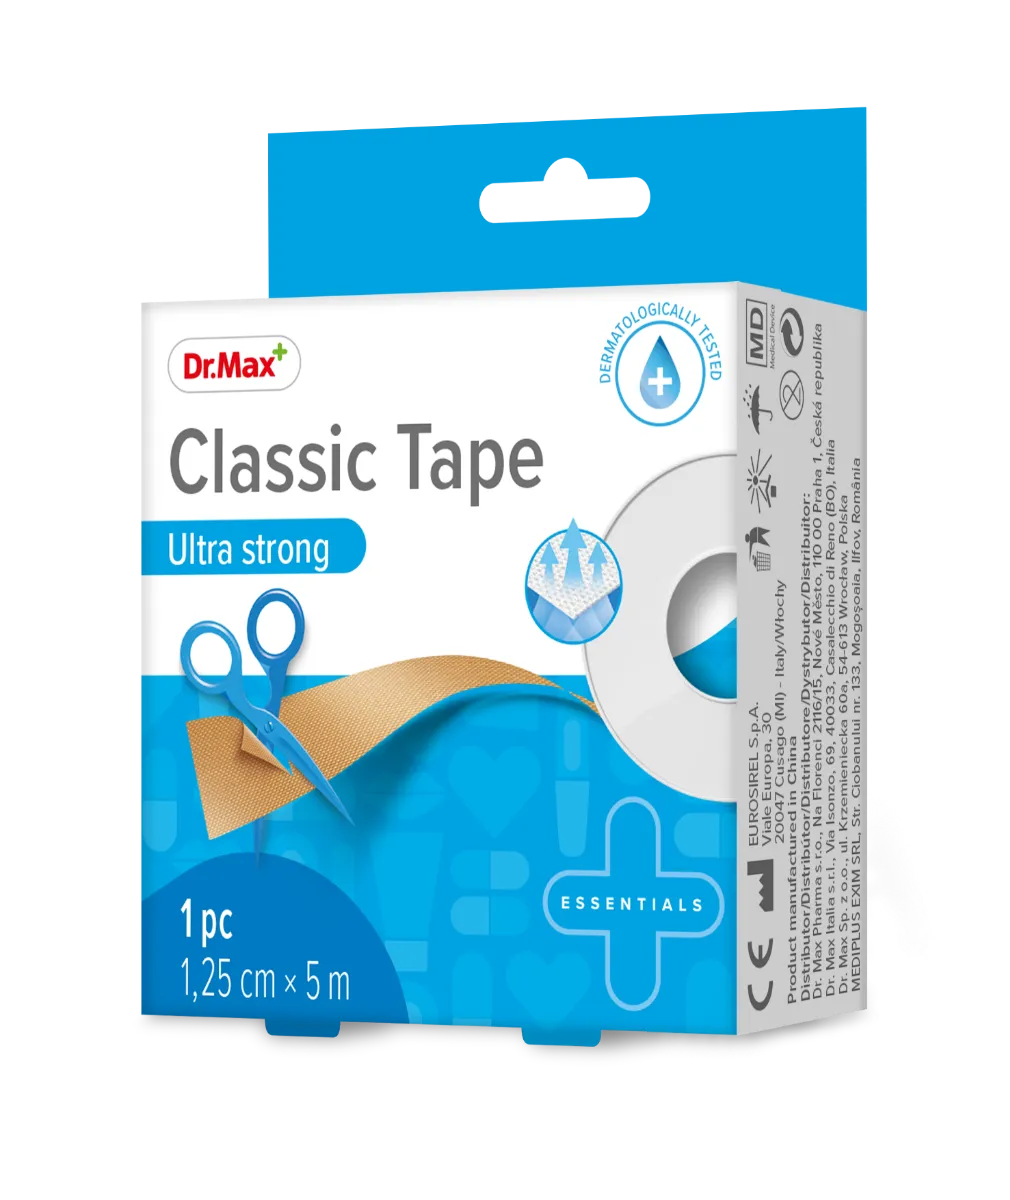 Dr.Max Classic Tape Ultra Strong 1,25 cm x 5 m Cerotto Ultra resistente